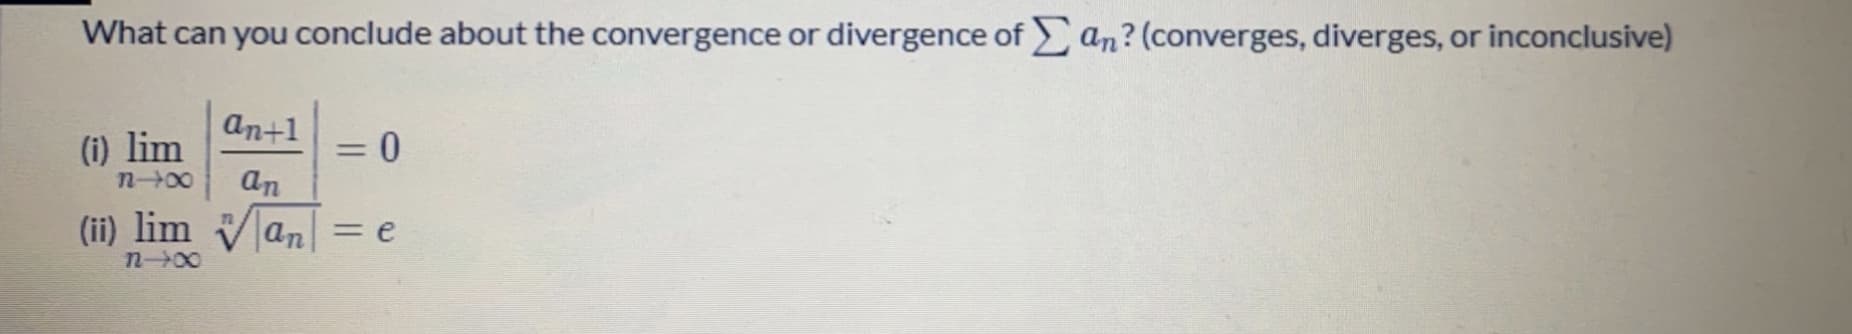 What can you conclude about the convergence or divergence of an? (converges, diverges, or inconclusive)
an+1
(i) lim
an
%3D
n+00
(ii) lim Van
3De
n-00
